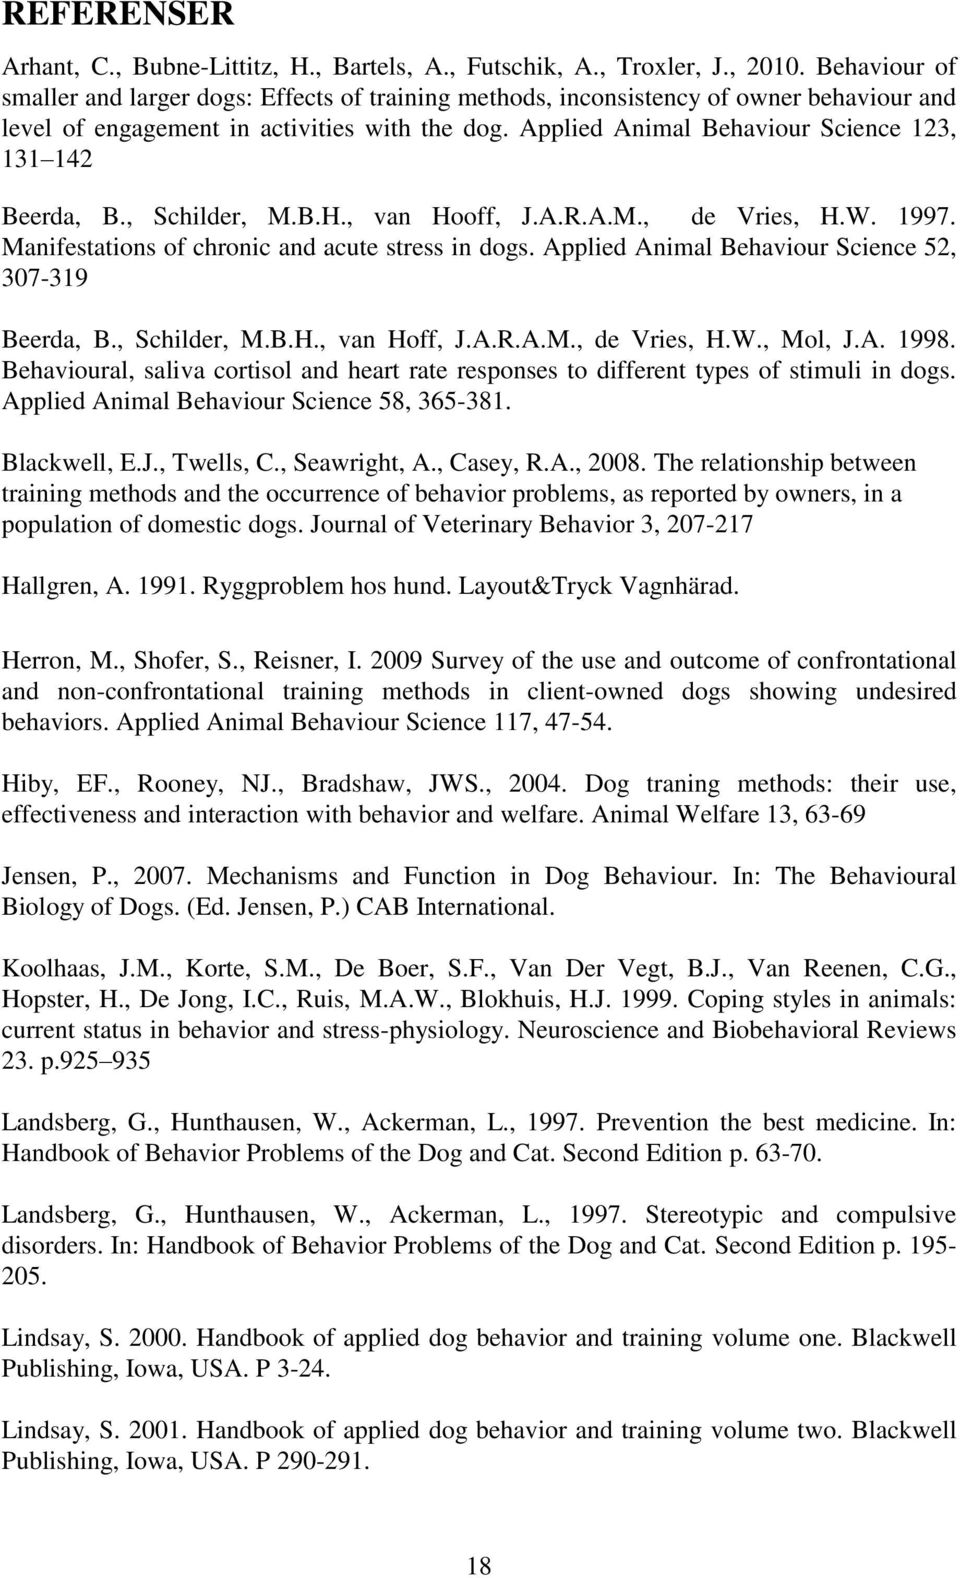 Applied Animal Behaviour Science 123, 131 142 Beerda, B., Schilder, M.B.H., van Hooff, J.A.R.A.M., de Vries, H.W. 1997. Manifestations of chronic and acute stress in dogs.